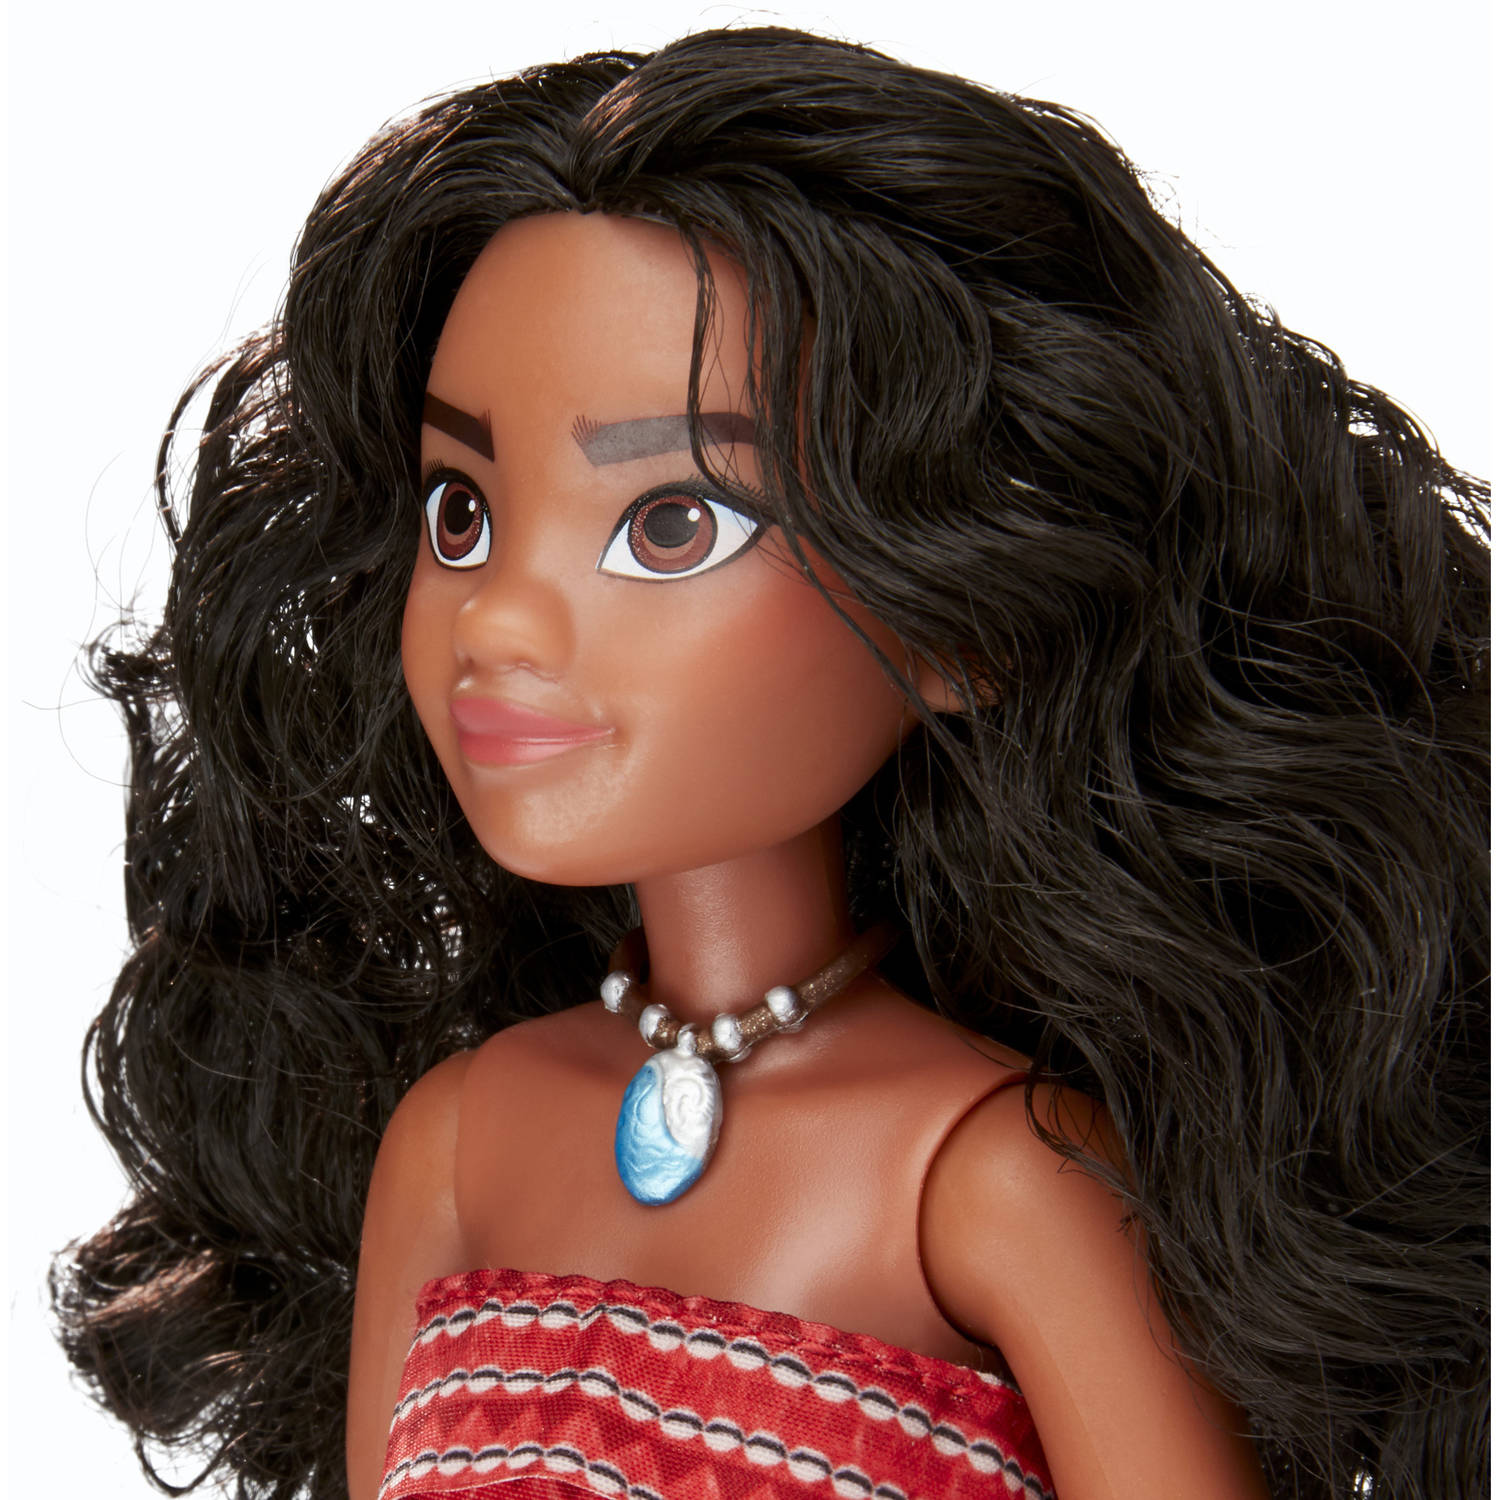 Disney Moana Of Oceania Adventure Figure, Ages 3 And Up - image 4 of 14